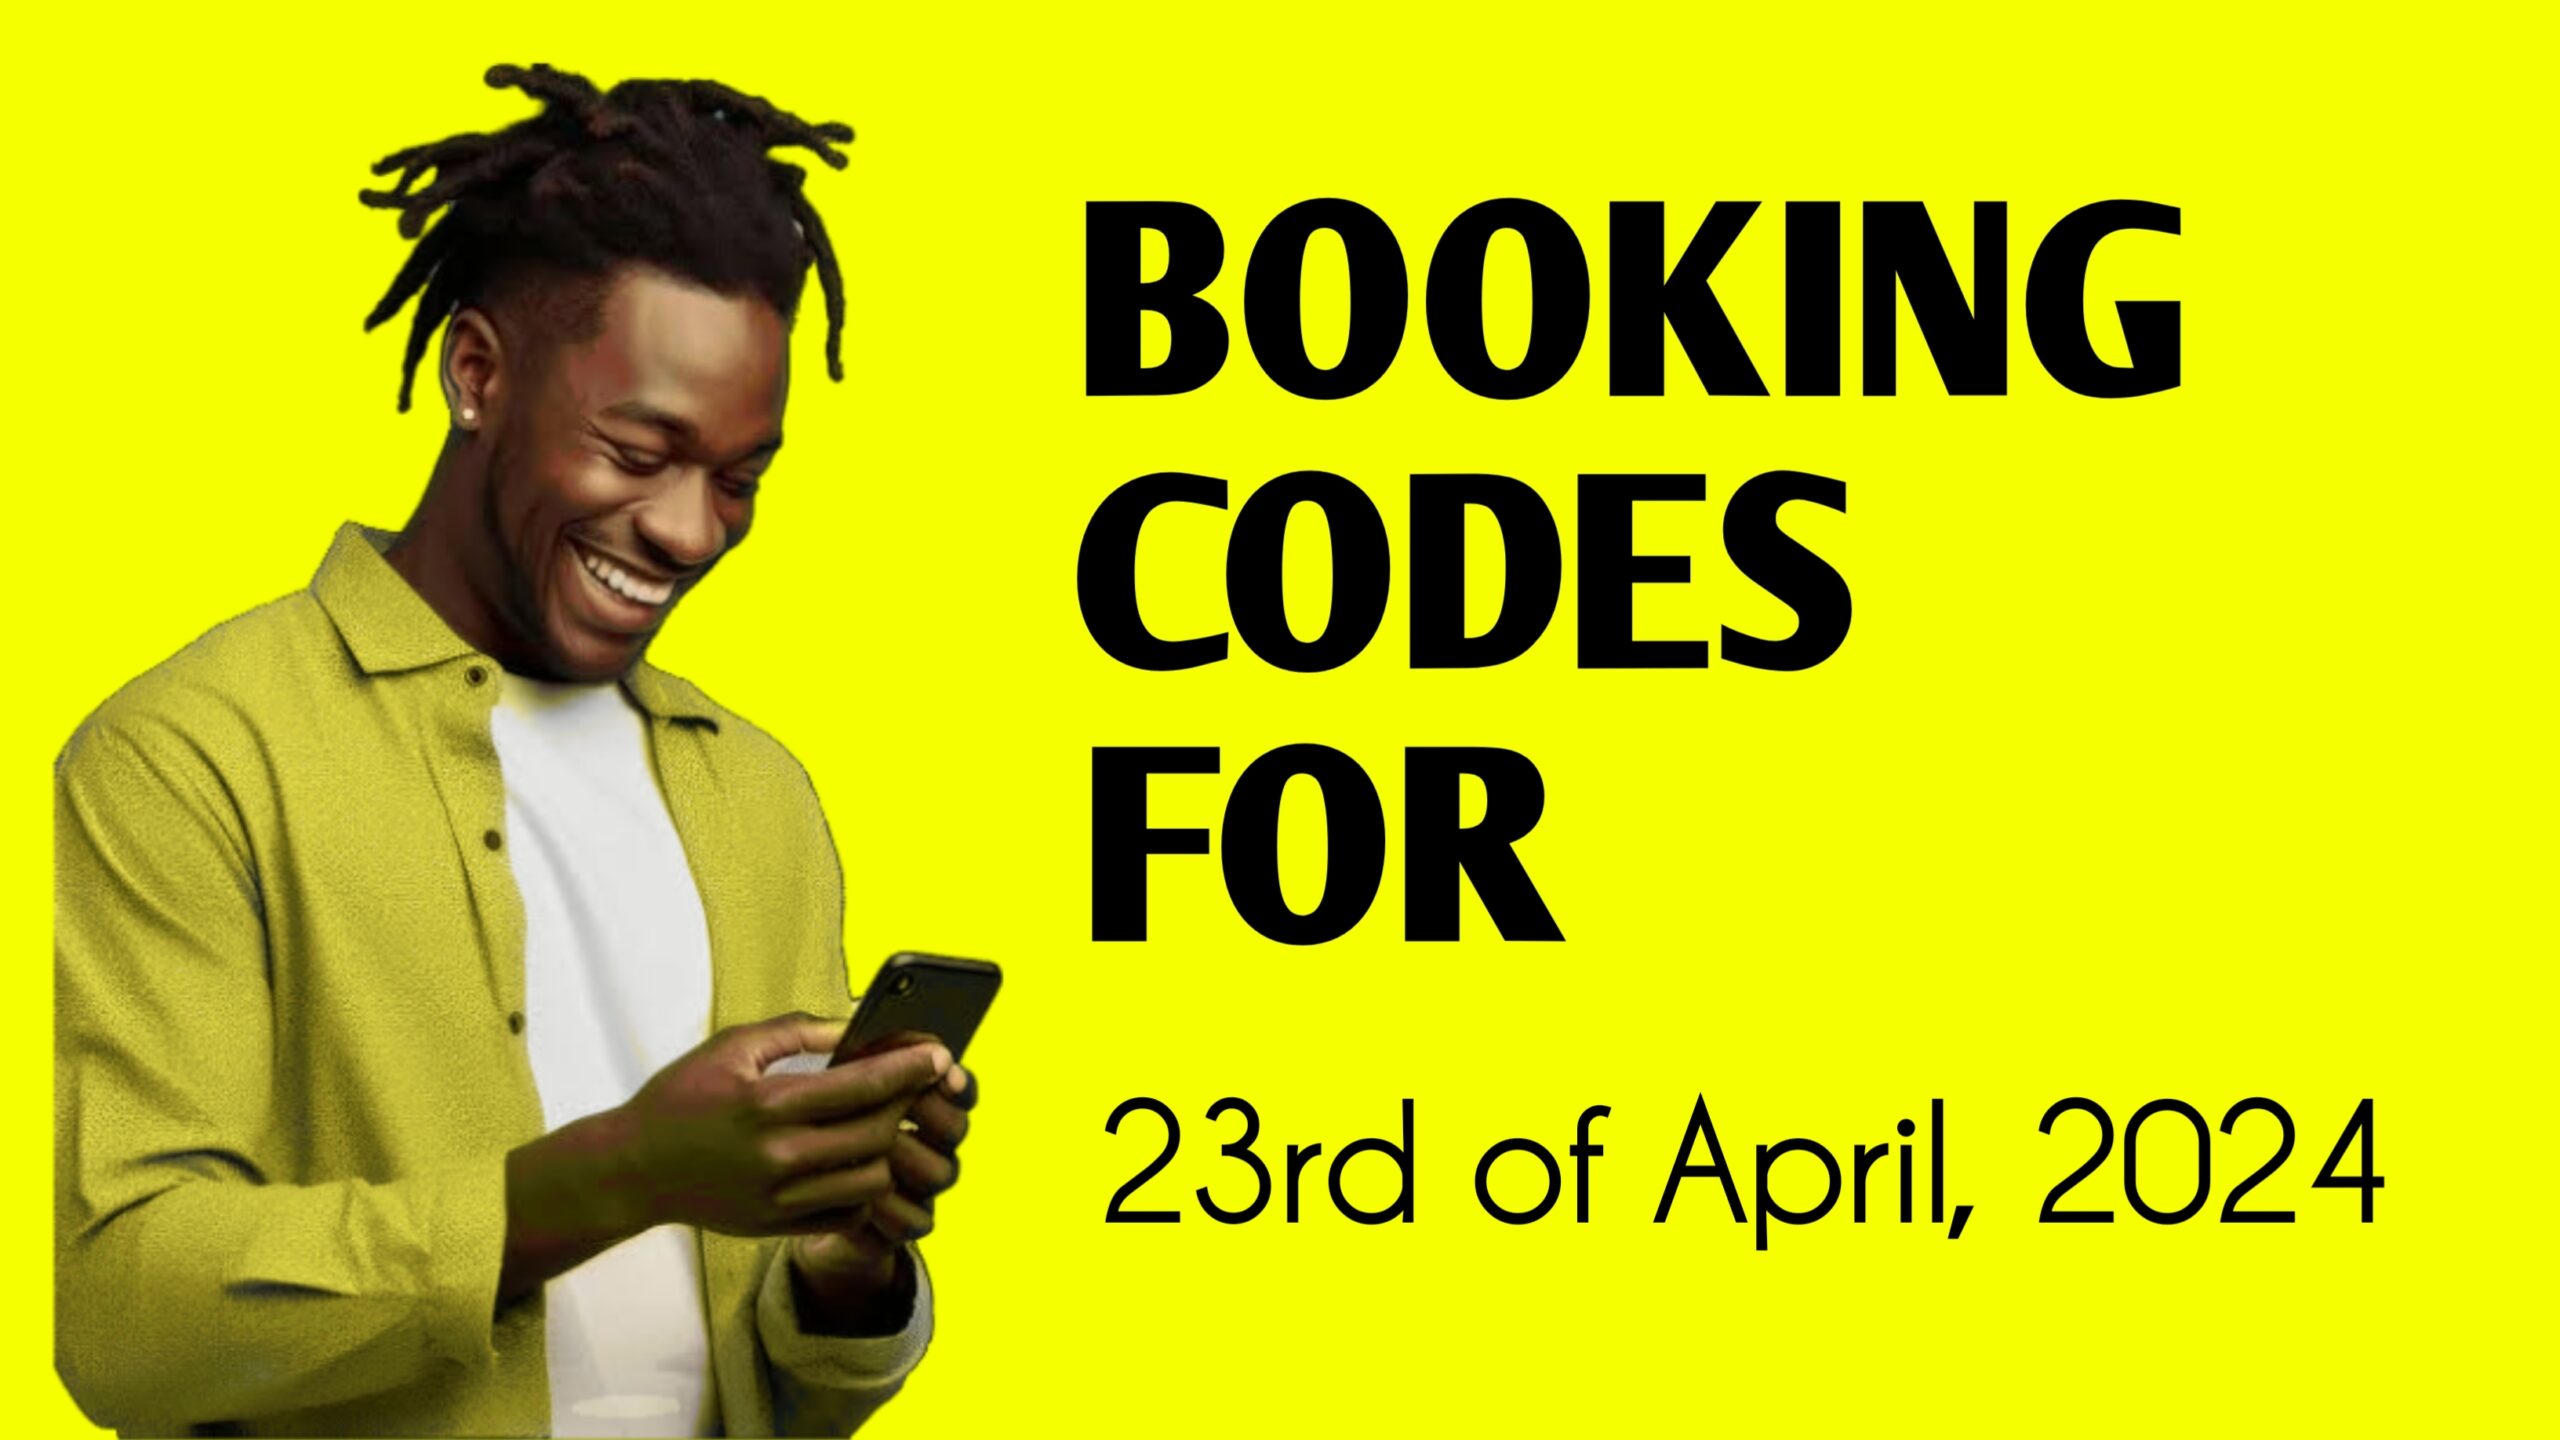 Booking Codes for 23rd of April, 2024